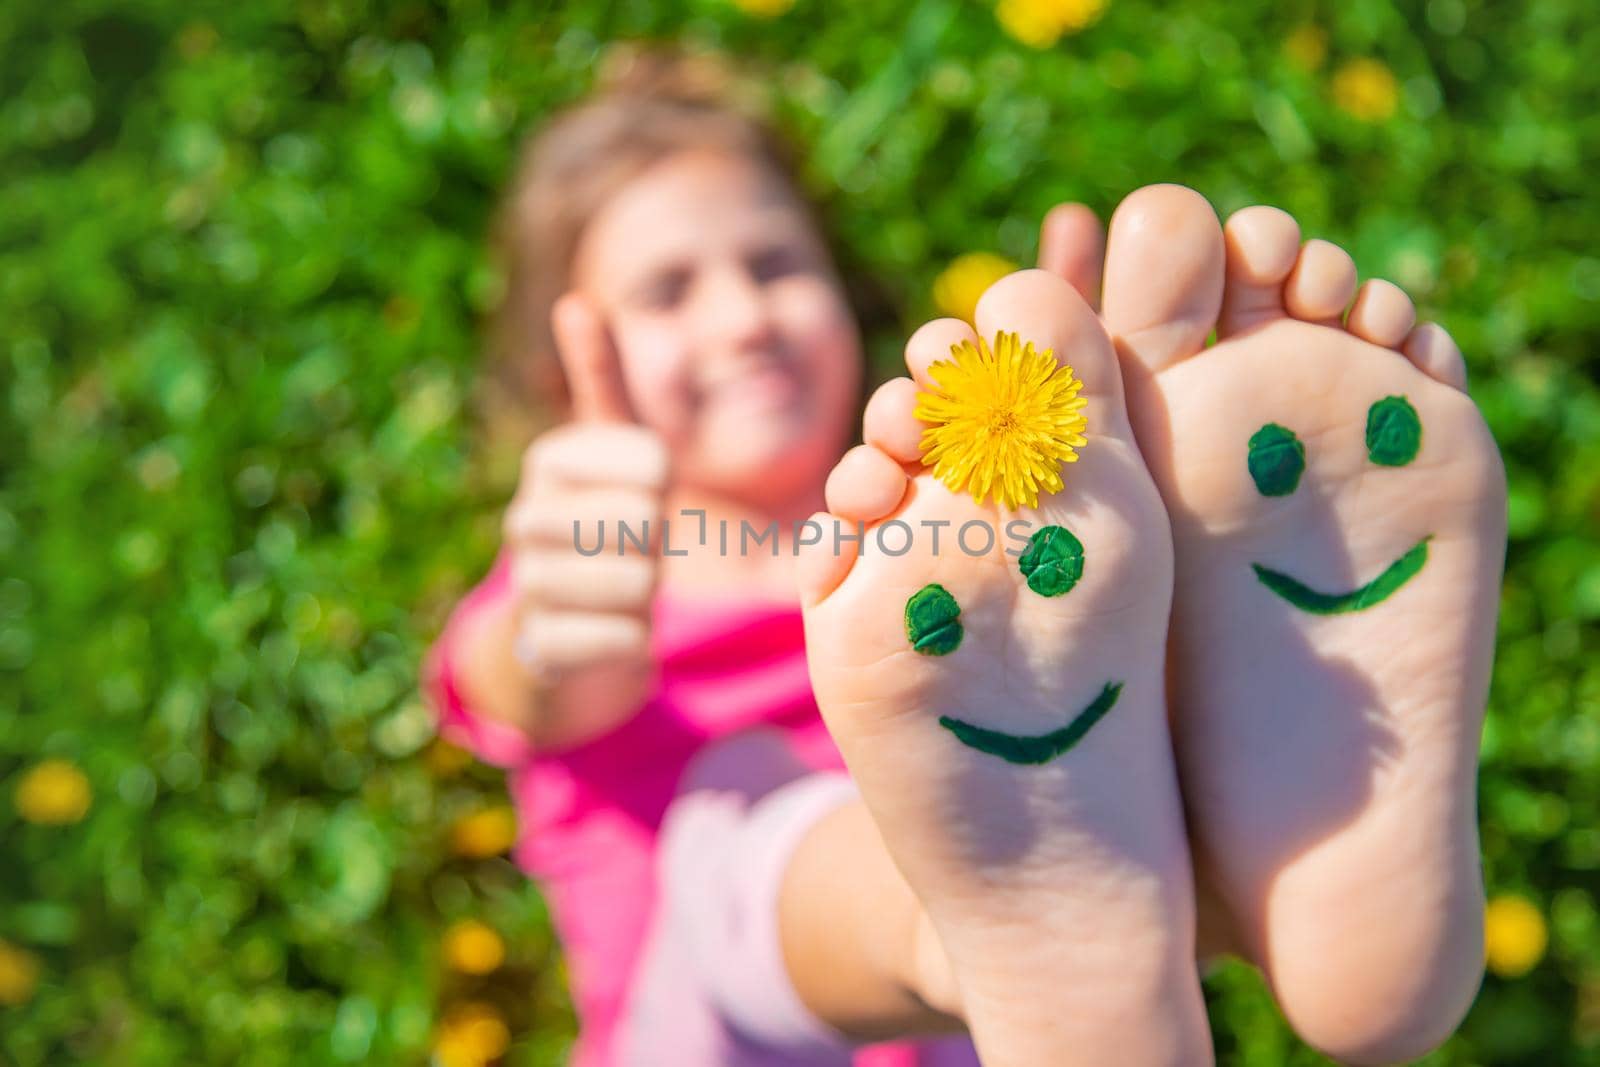 Child feet on the grass drawing a smile. Selective focus. Kid.